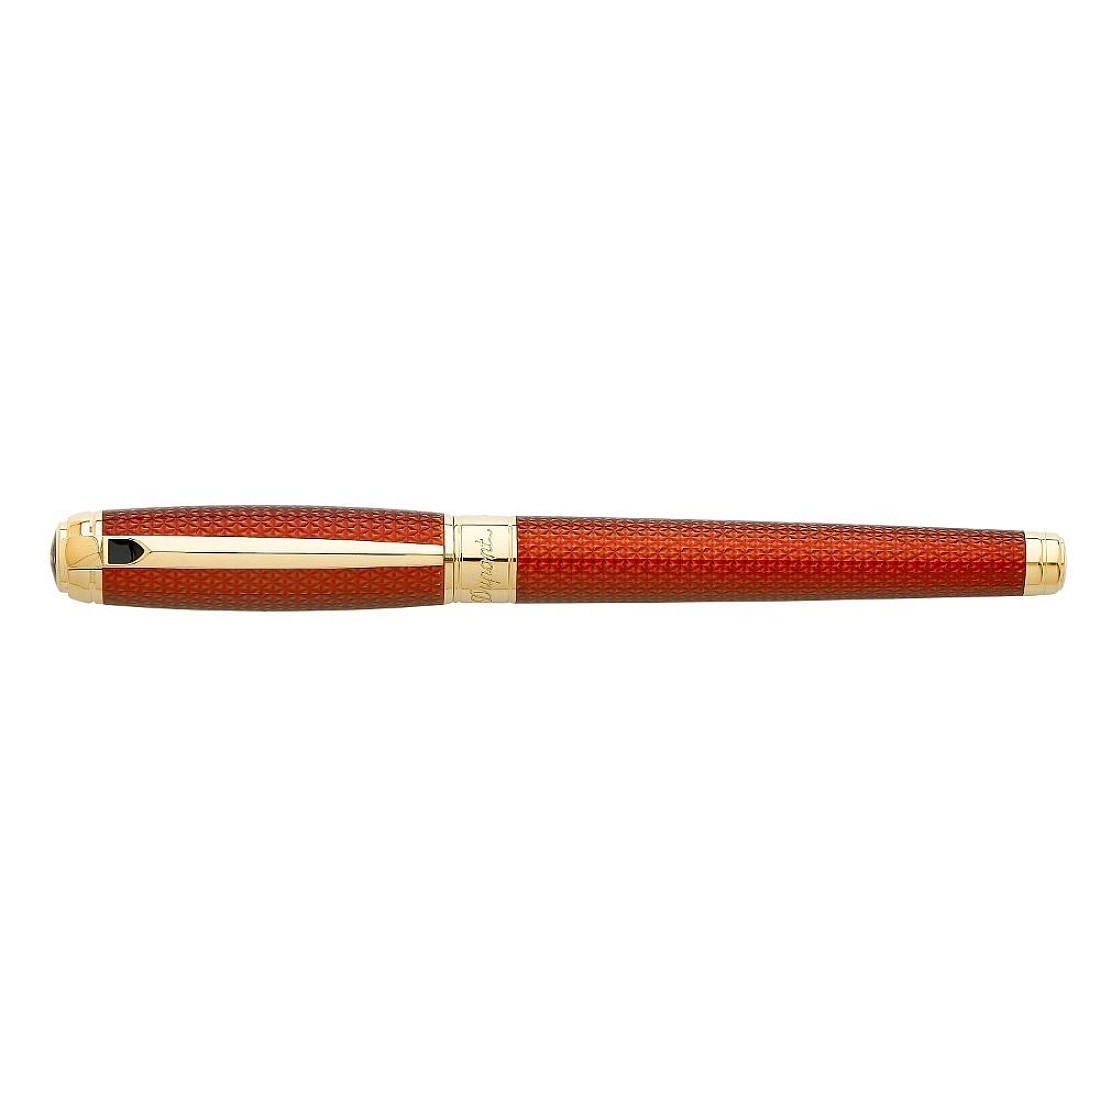 S.T. Dupont Line D Large Firehead Guilloche Amber Fountain pen